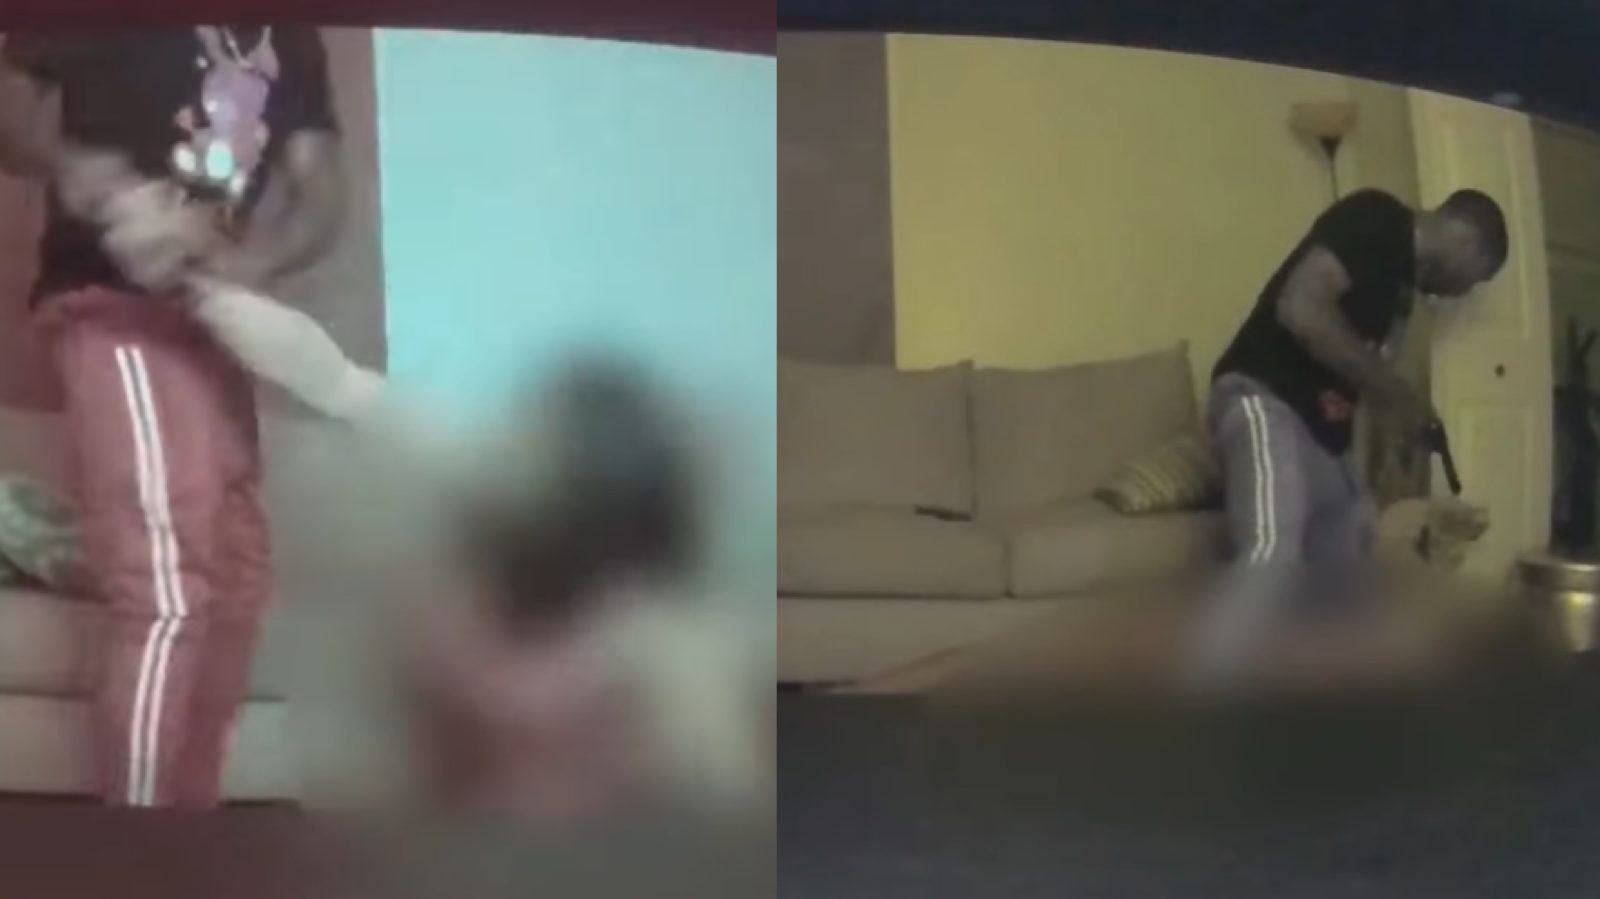 The officer (blurred) being held at gunpoint and beaten by the robber.